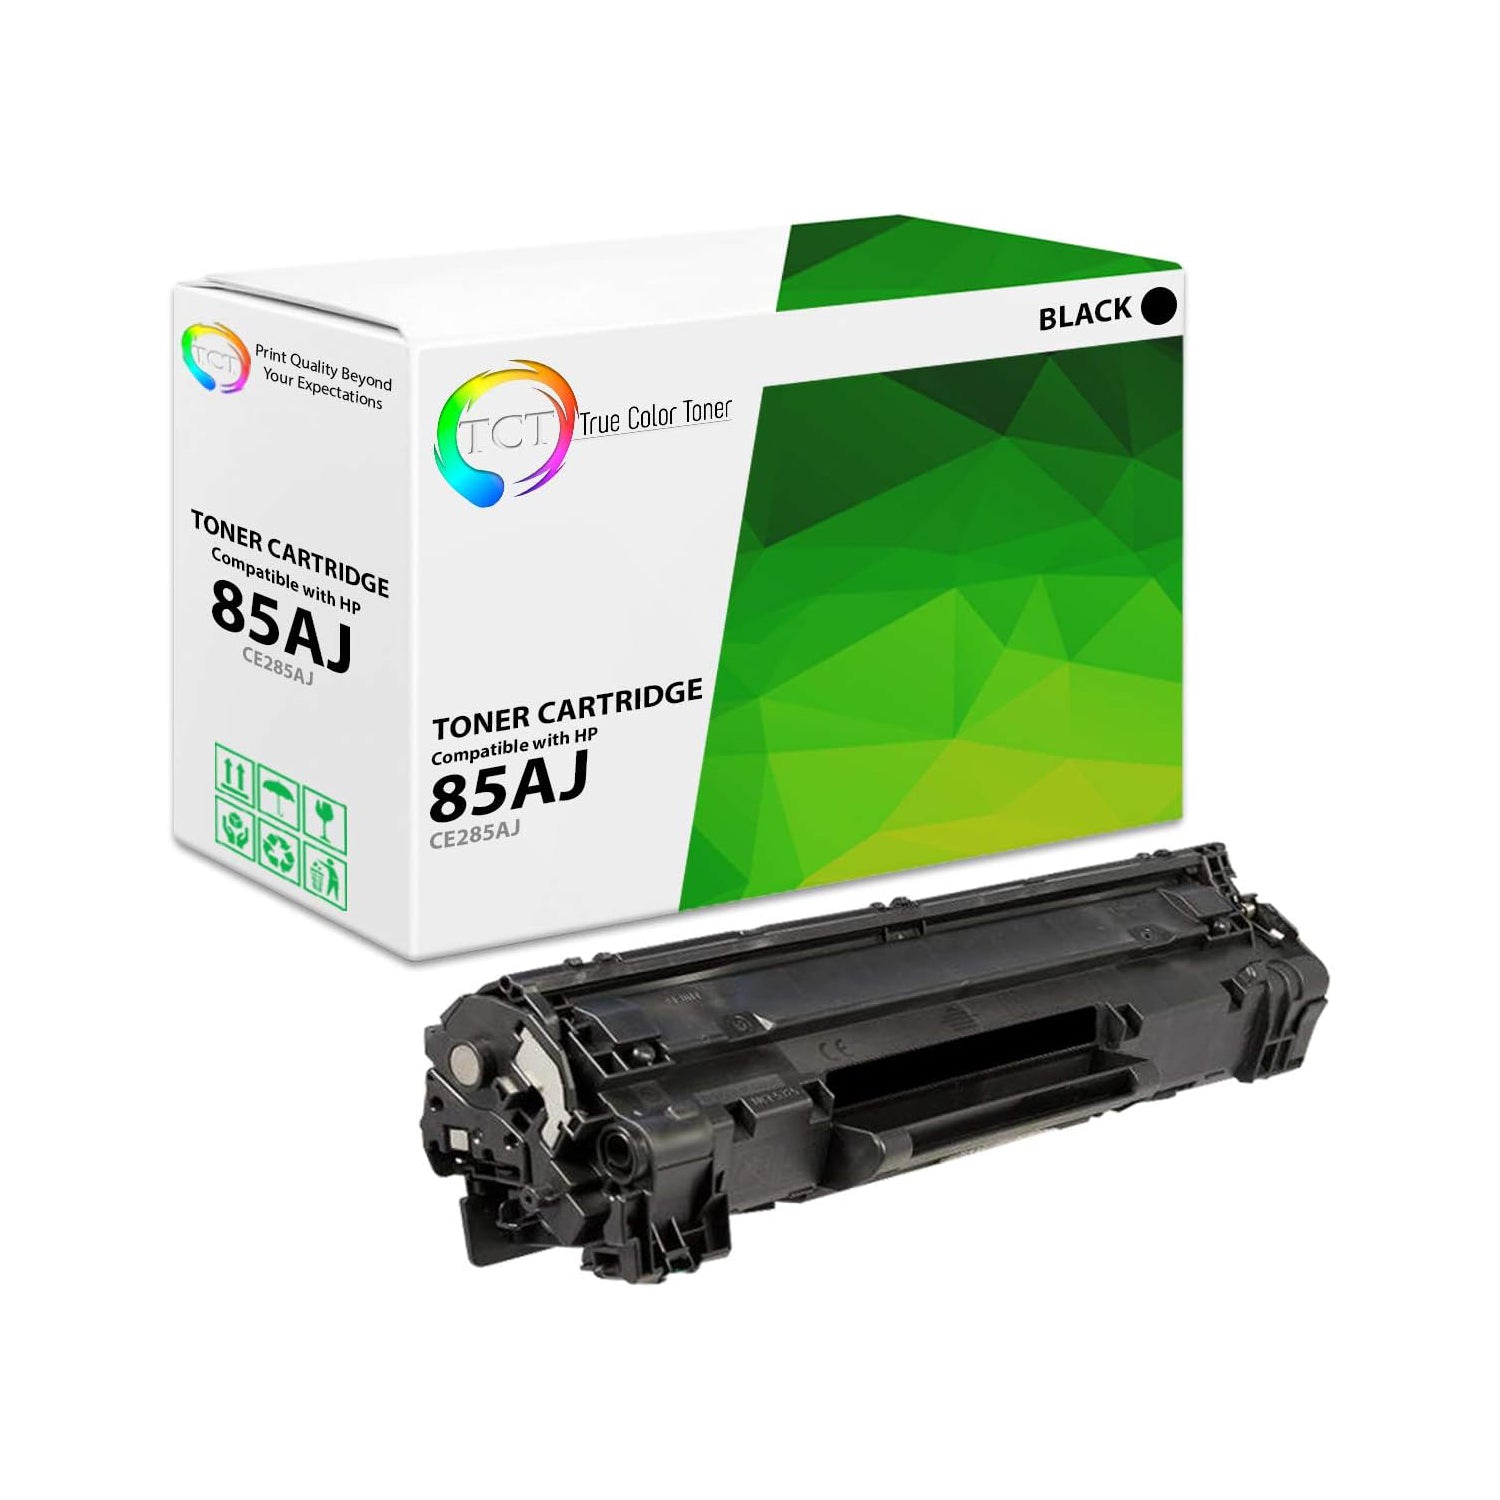 TCT Compatible Jumbo Toner Cartridge Replacement for the HP 85AJ Series - 1 Pack Black